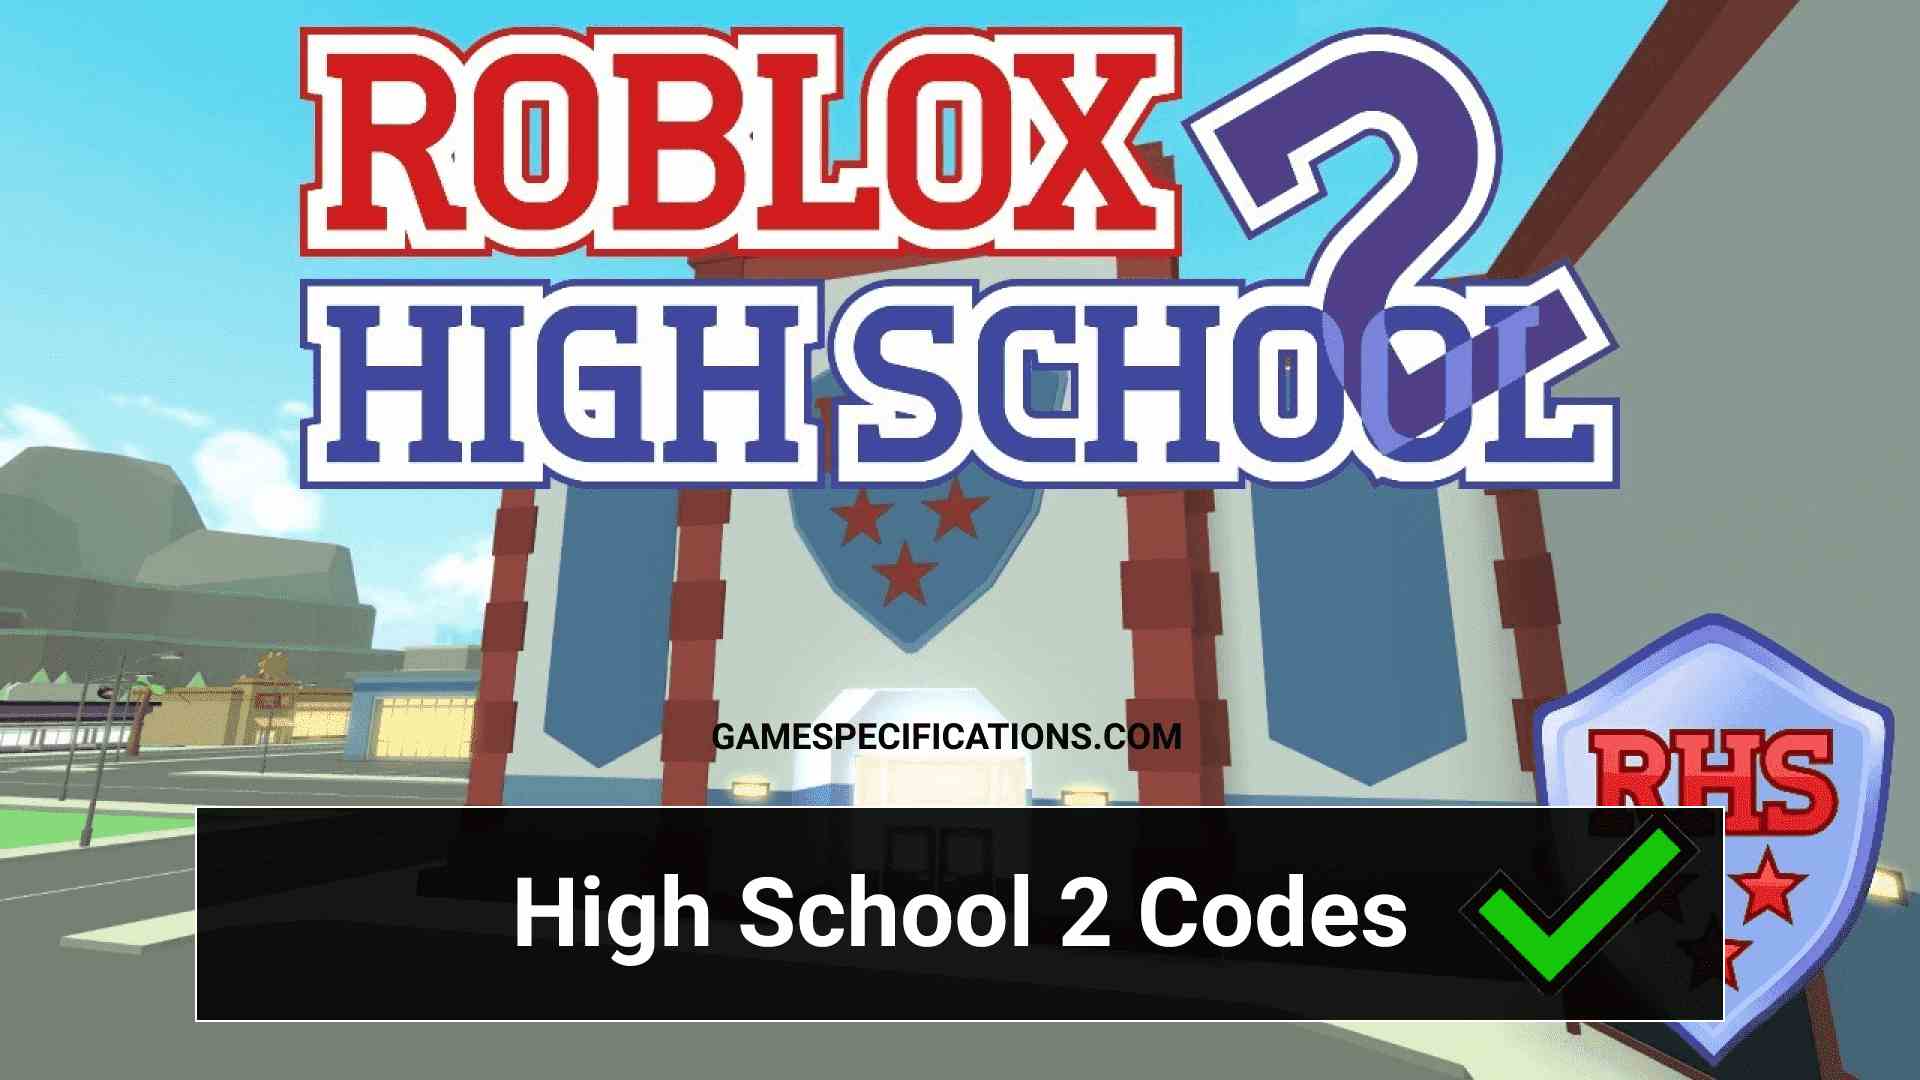 17 Working Roblox High School 2 Codes July 2021 Game Specifications - how to enter code in roblox high school